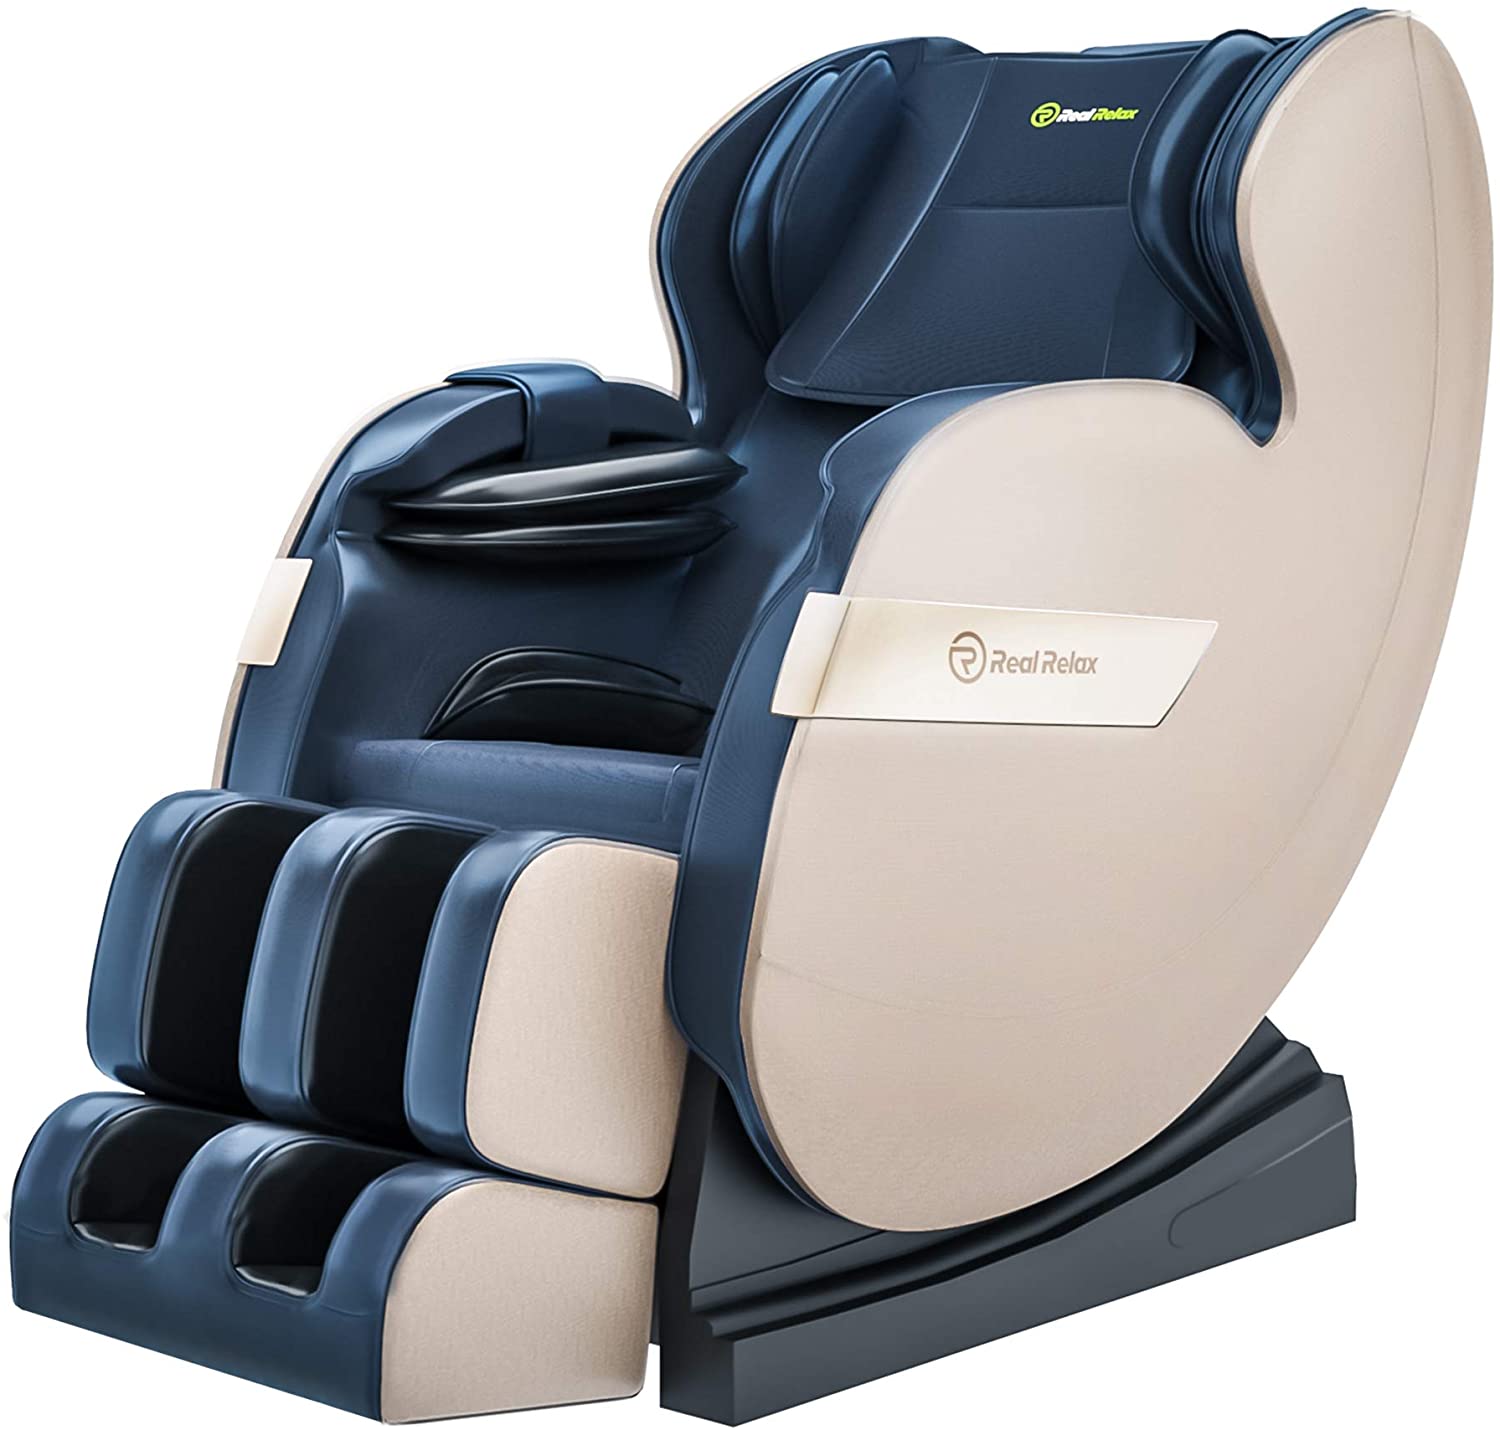 Real Relax 2020 Massage Chair white